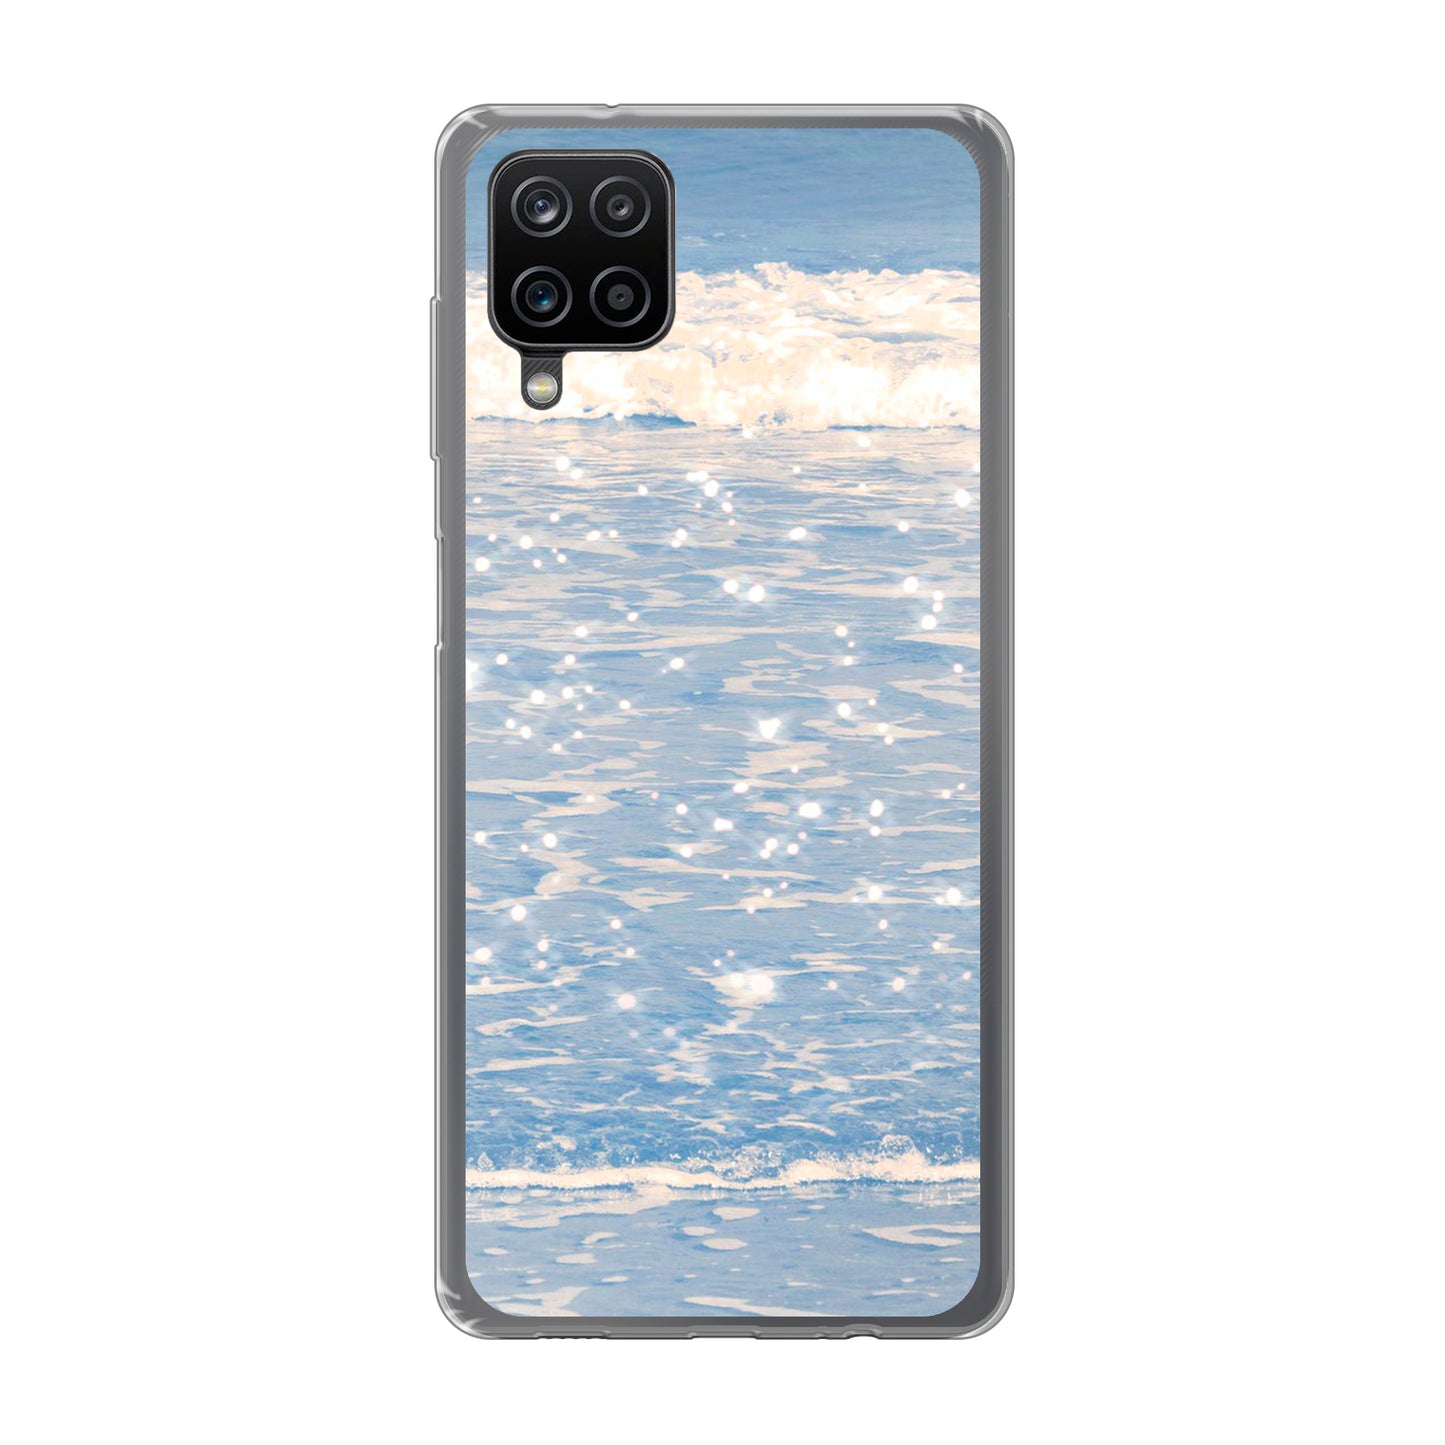 Galaxy A12 Hülle Softcase transparent